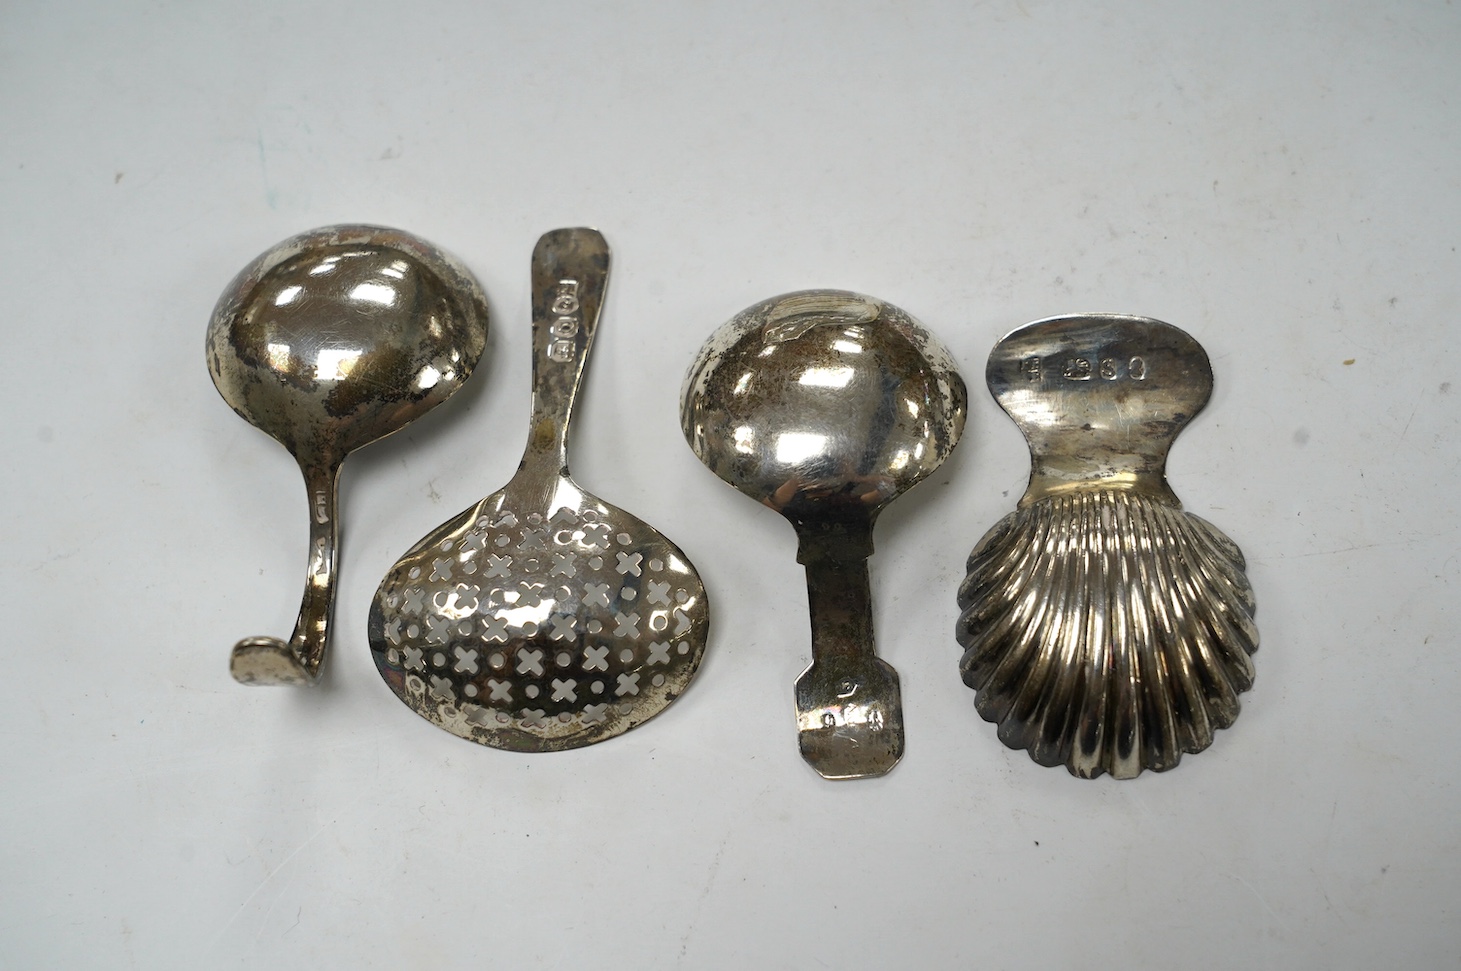 Four assorted silver caddy spoons, including Peter & Ann Bateman, London, 1793, 59mm, reeded handle, Joseph Wilmore?, Birmingham, 1807, pierced bowl, Alice & George Burrows, London, 1809 and curved handle John Lambe, Lon